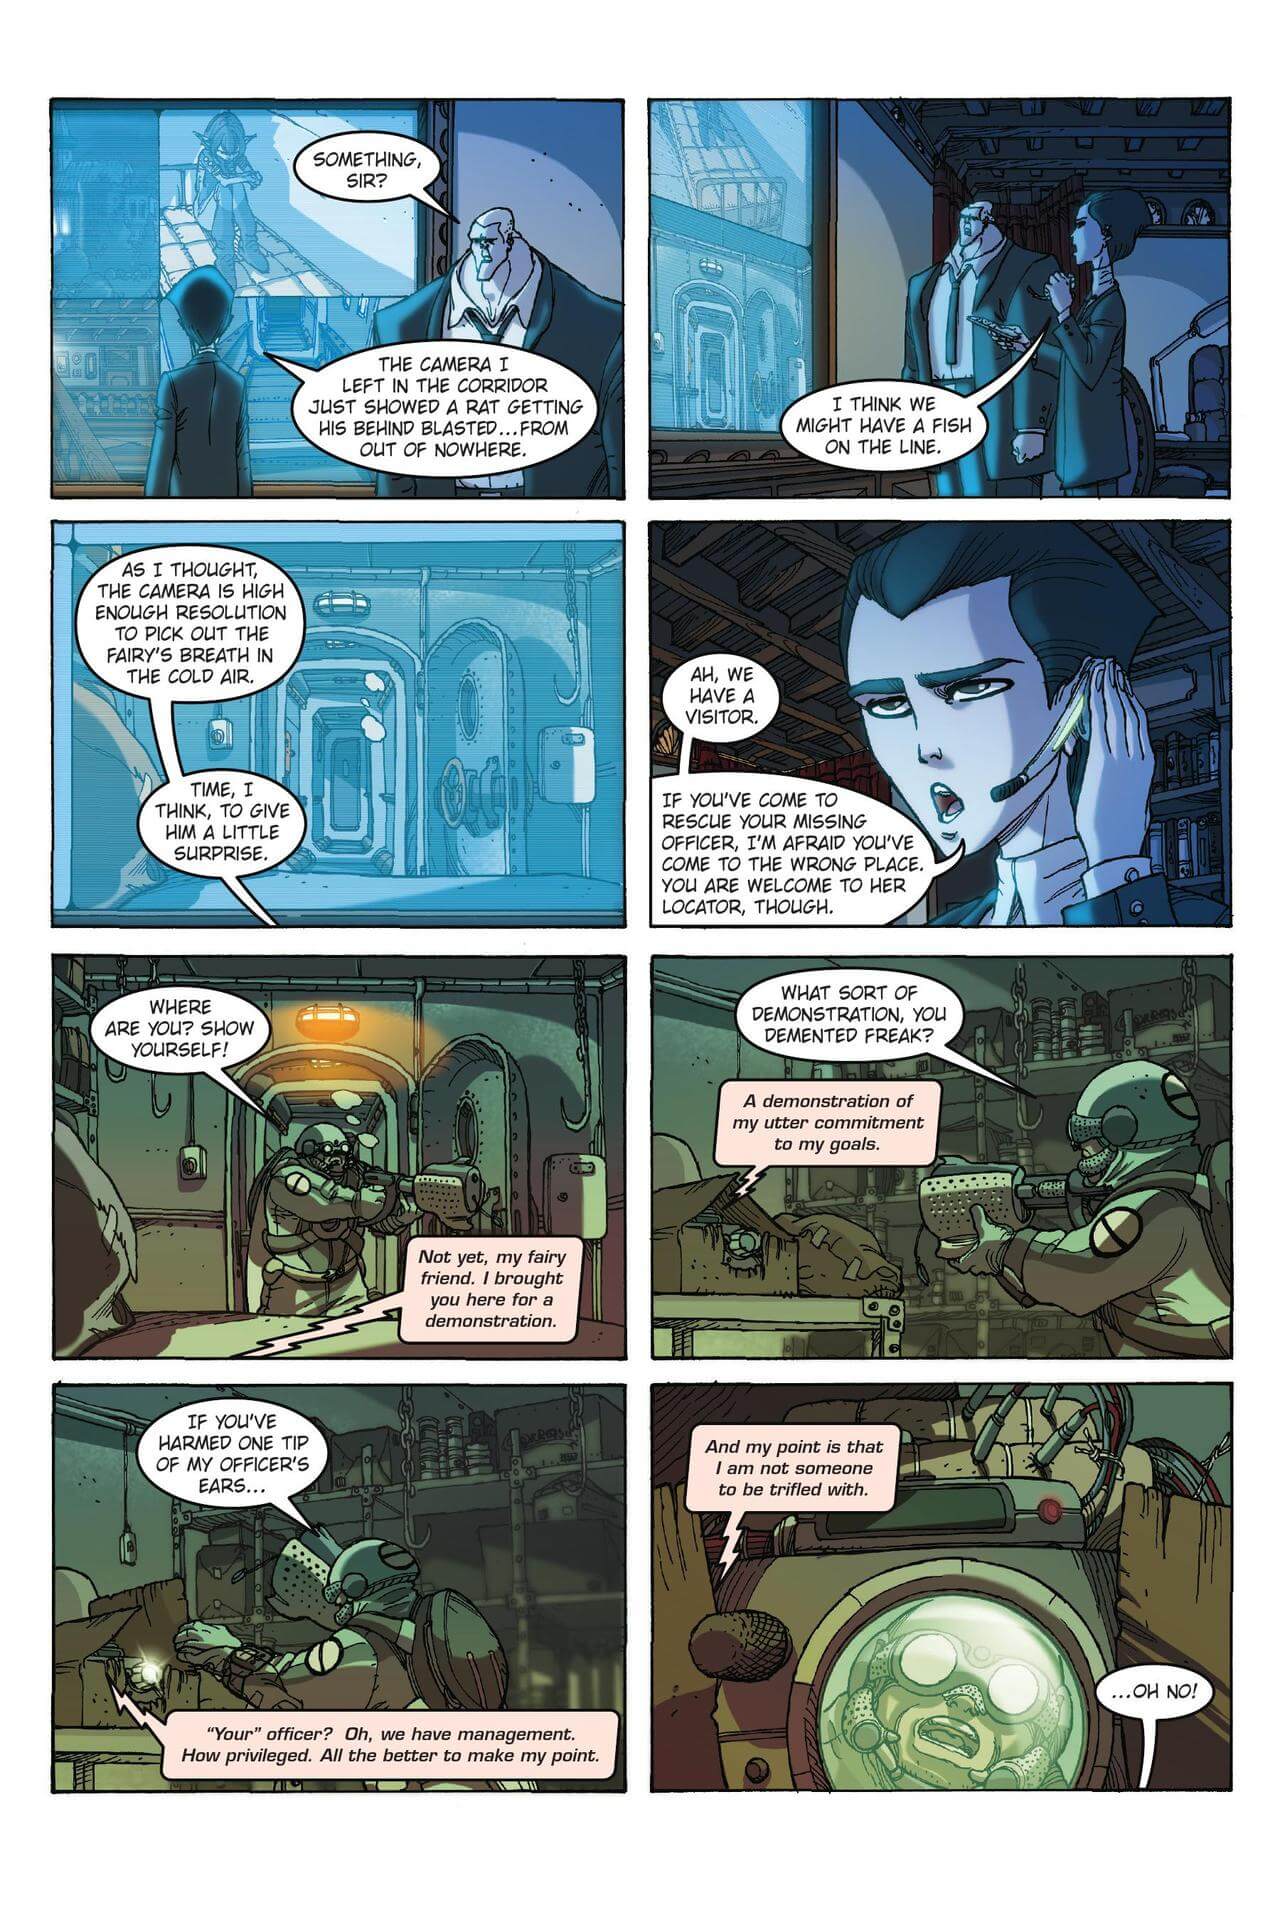 page 43 of artemis fowl the graphic novel